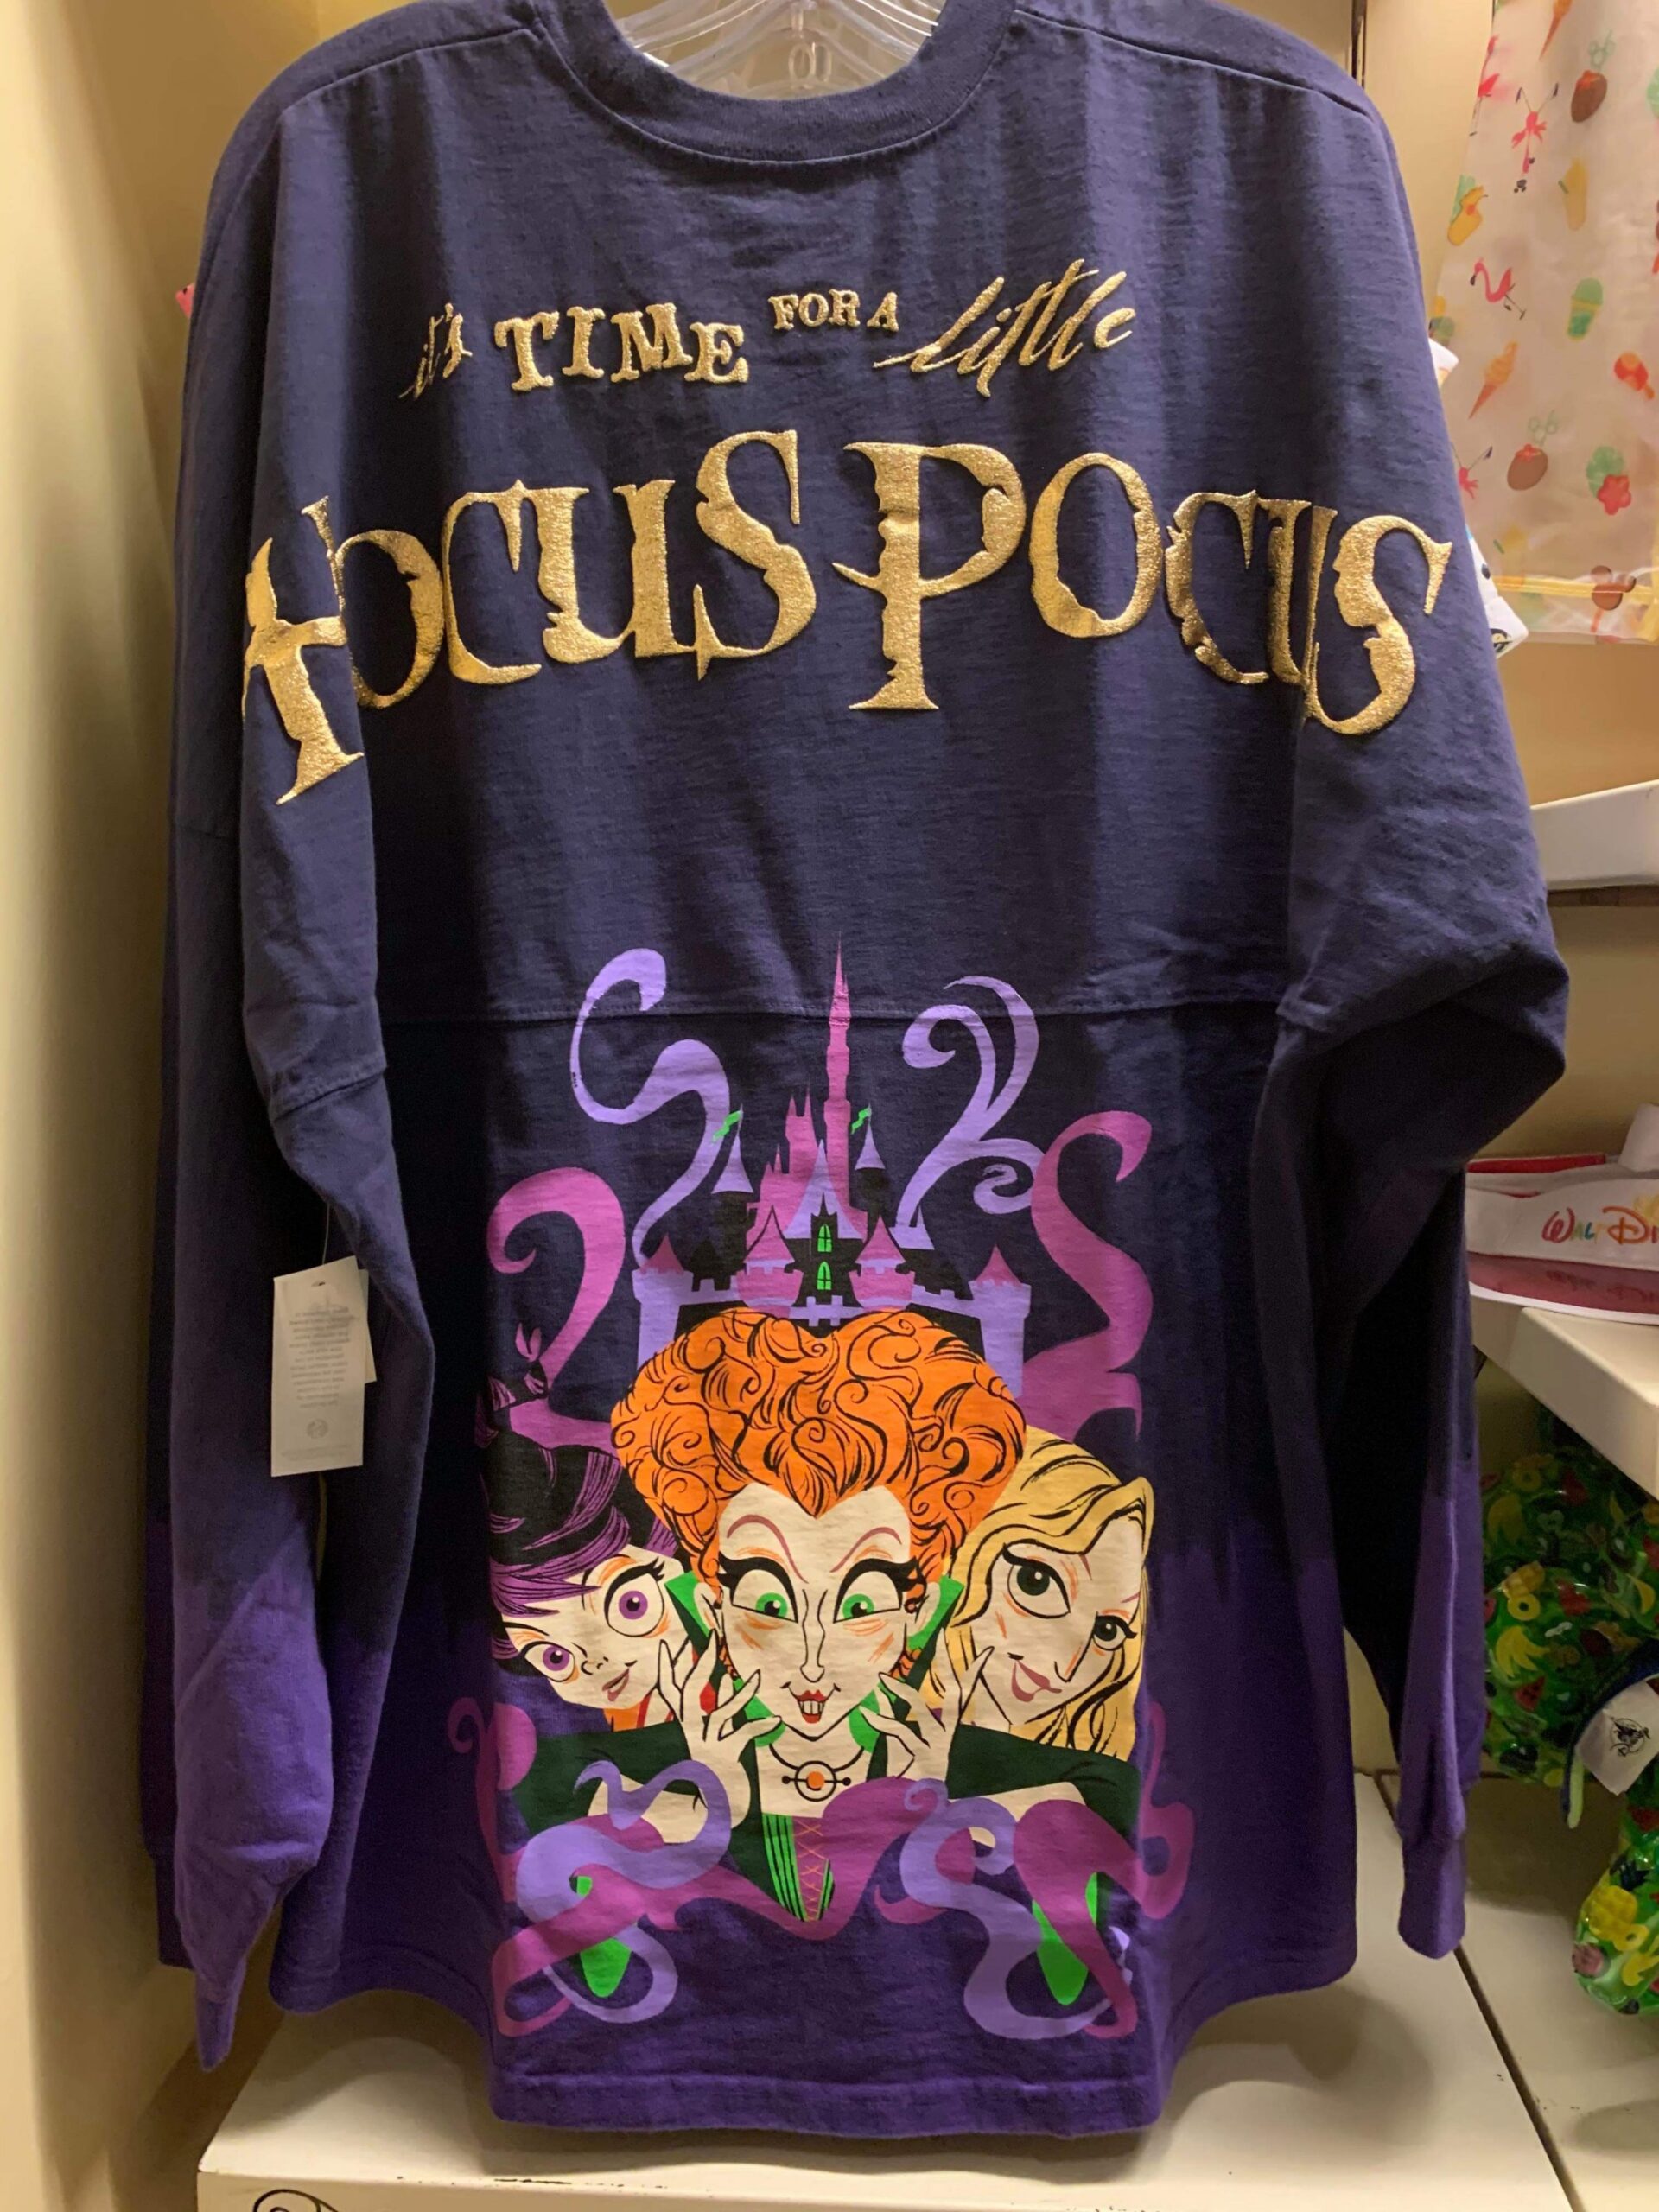 The Hocus Pocus Merch at Disney Parks Has Me Reaching For My Wallet ...